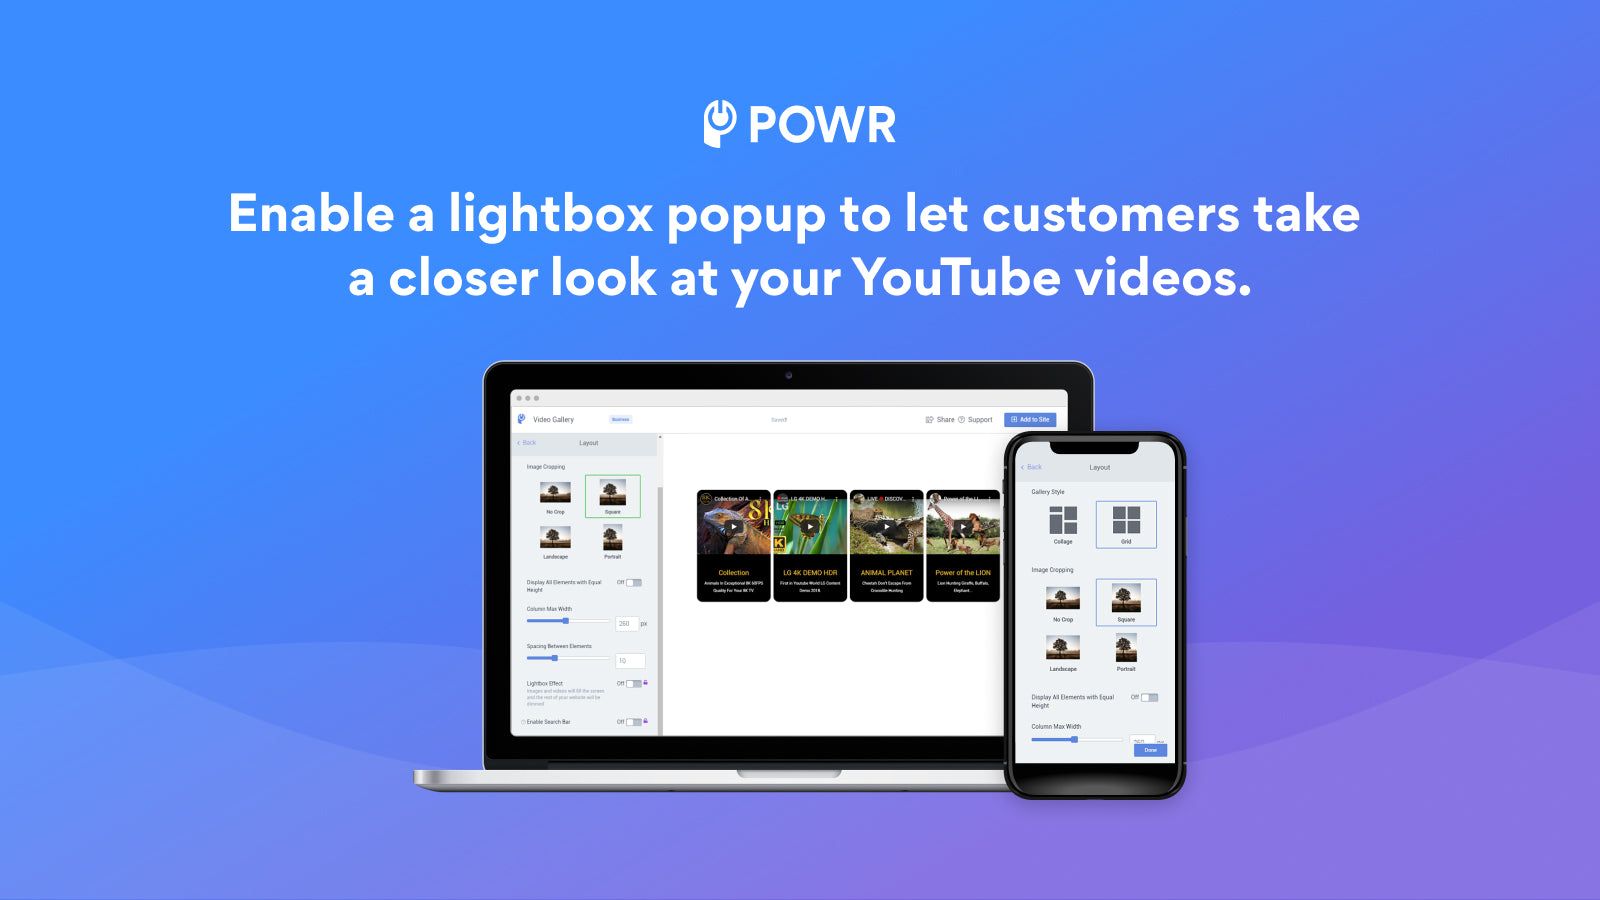 Enable lightbox popup to let customers look at YouTube videos.